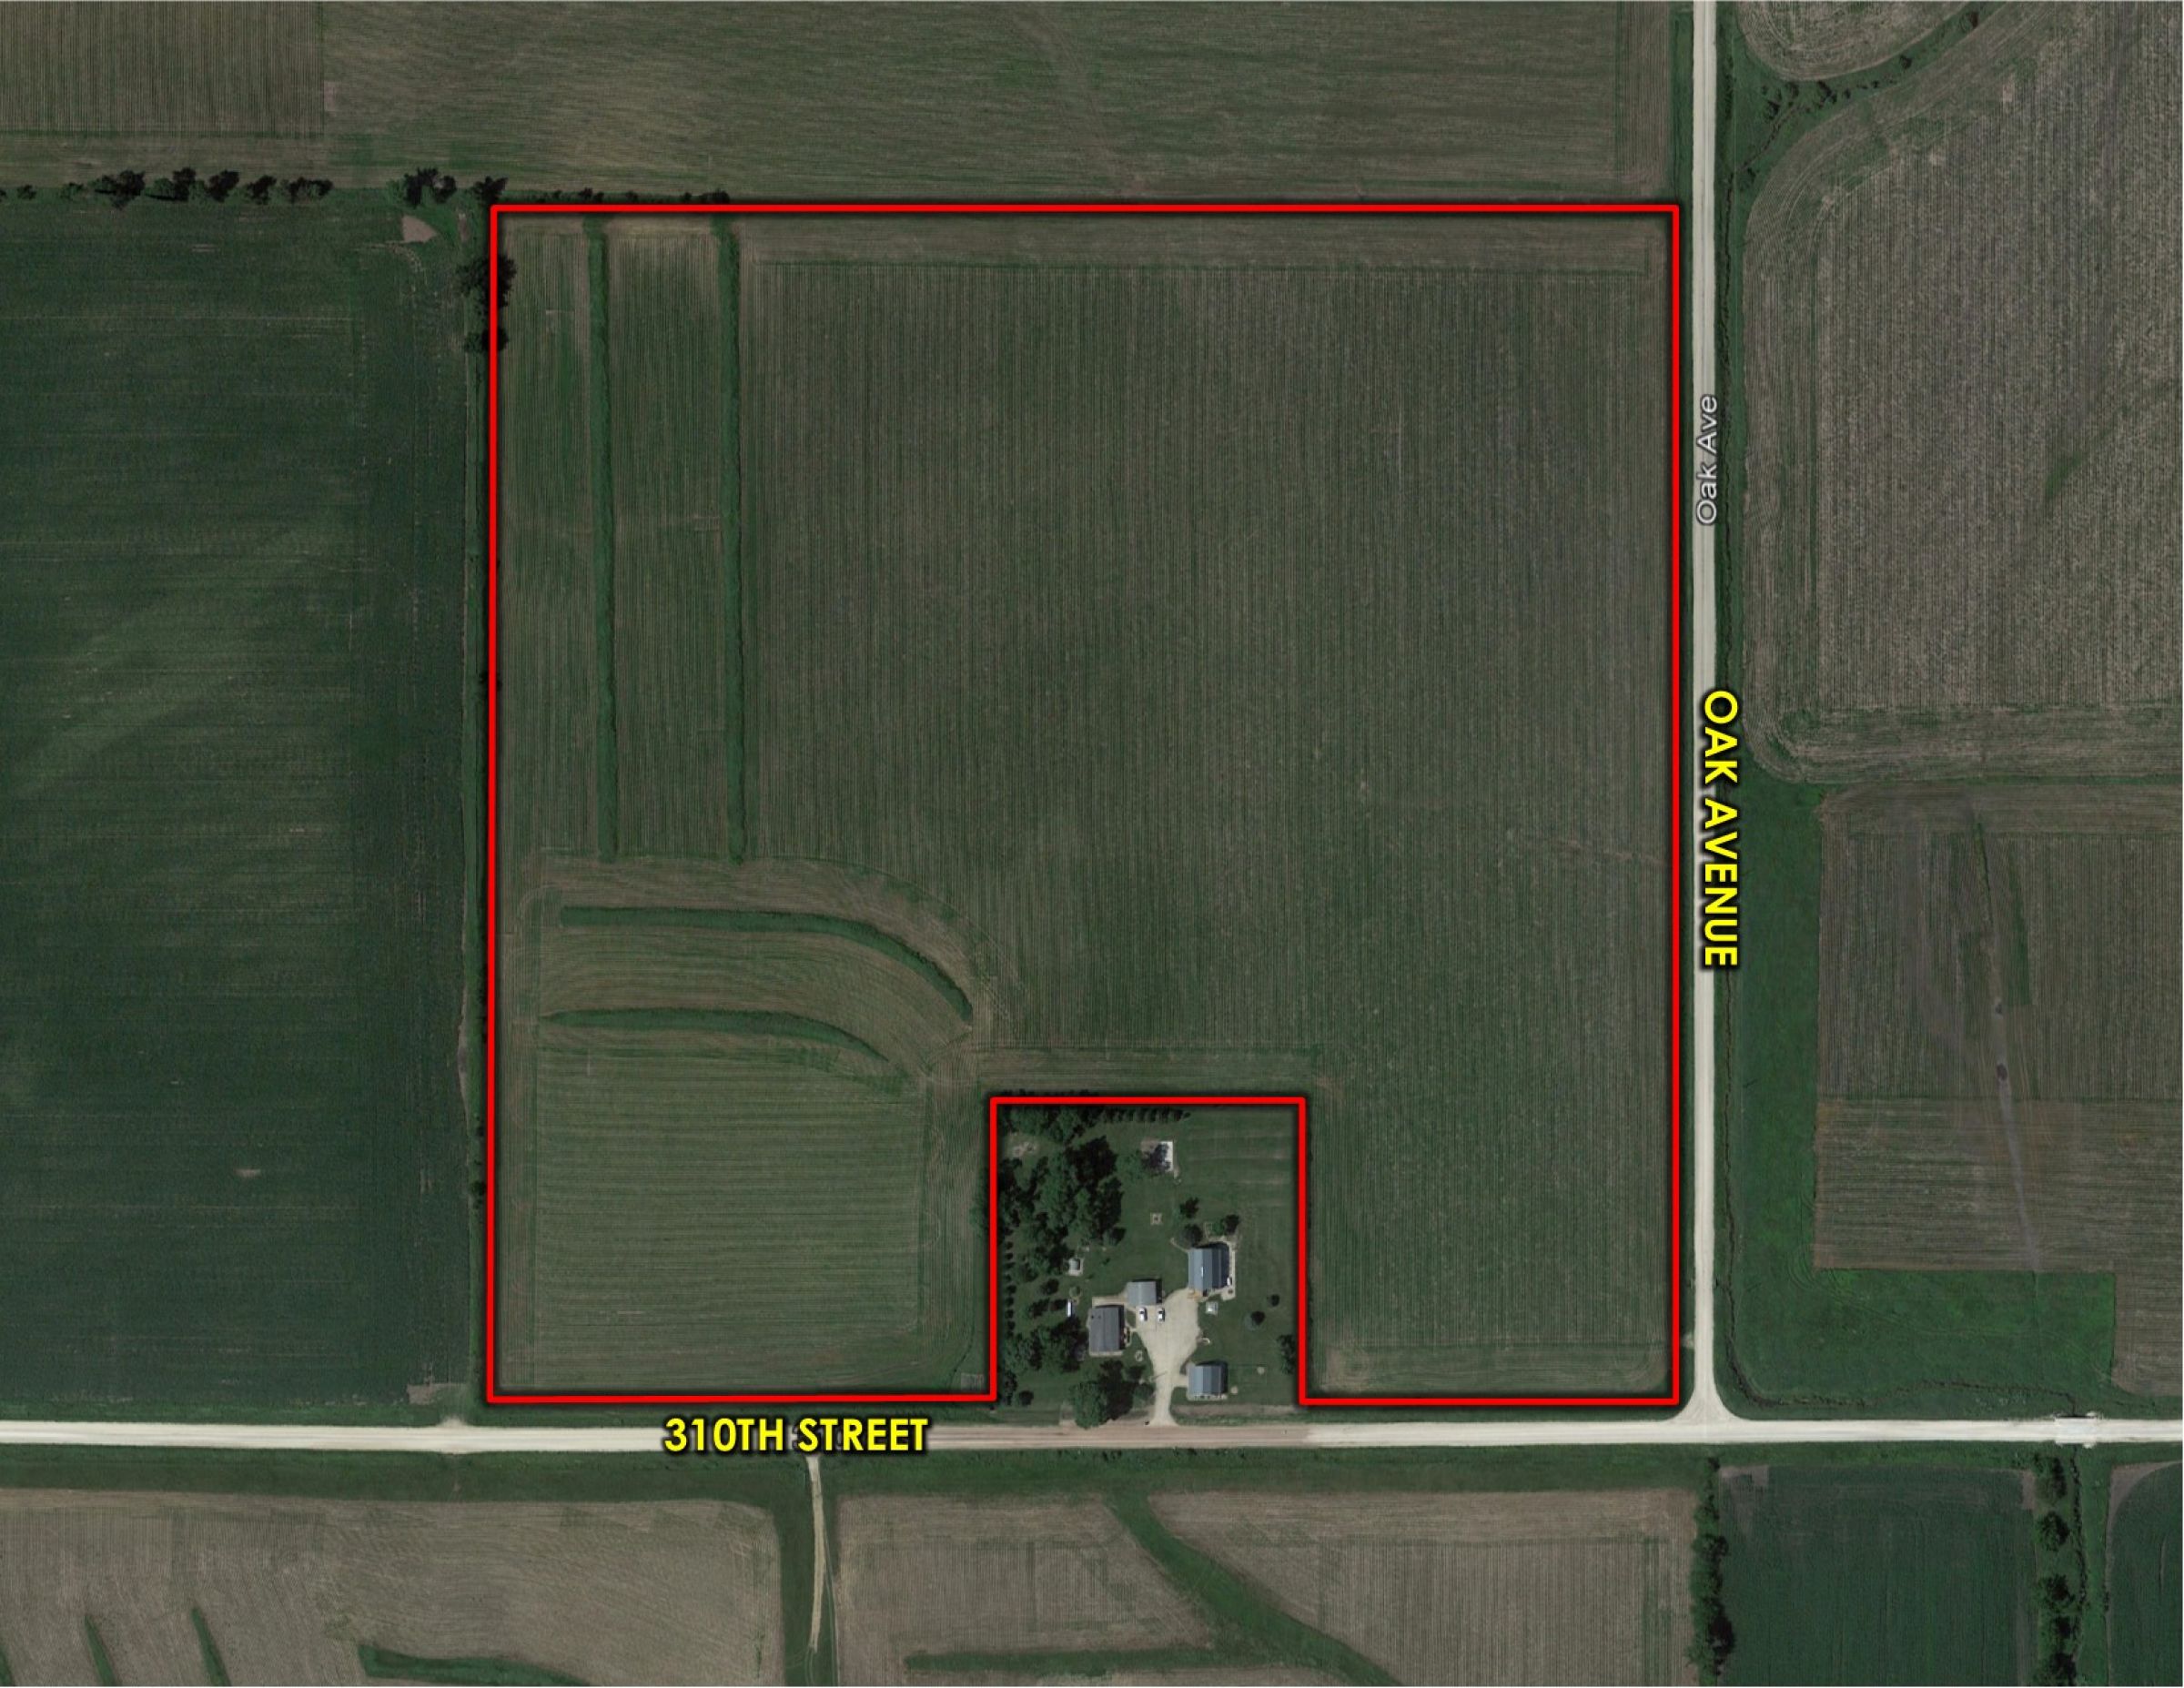 Peoples Company Land For Sale-#14637-310th-street-parkersburg-50665